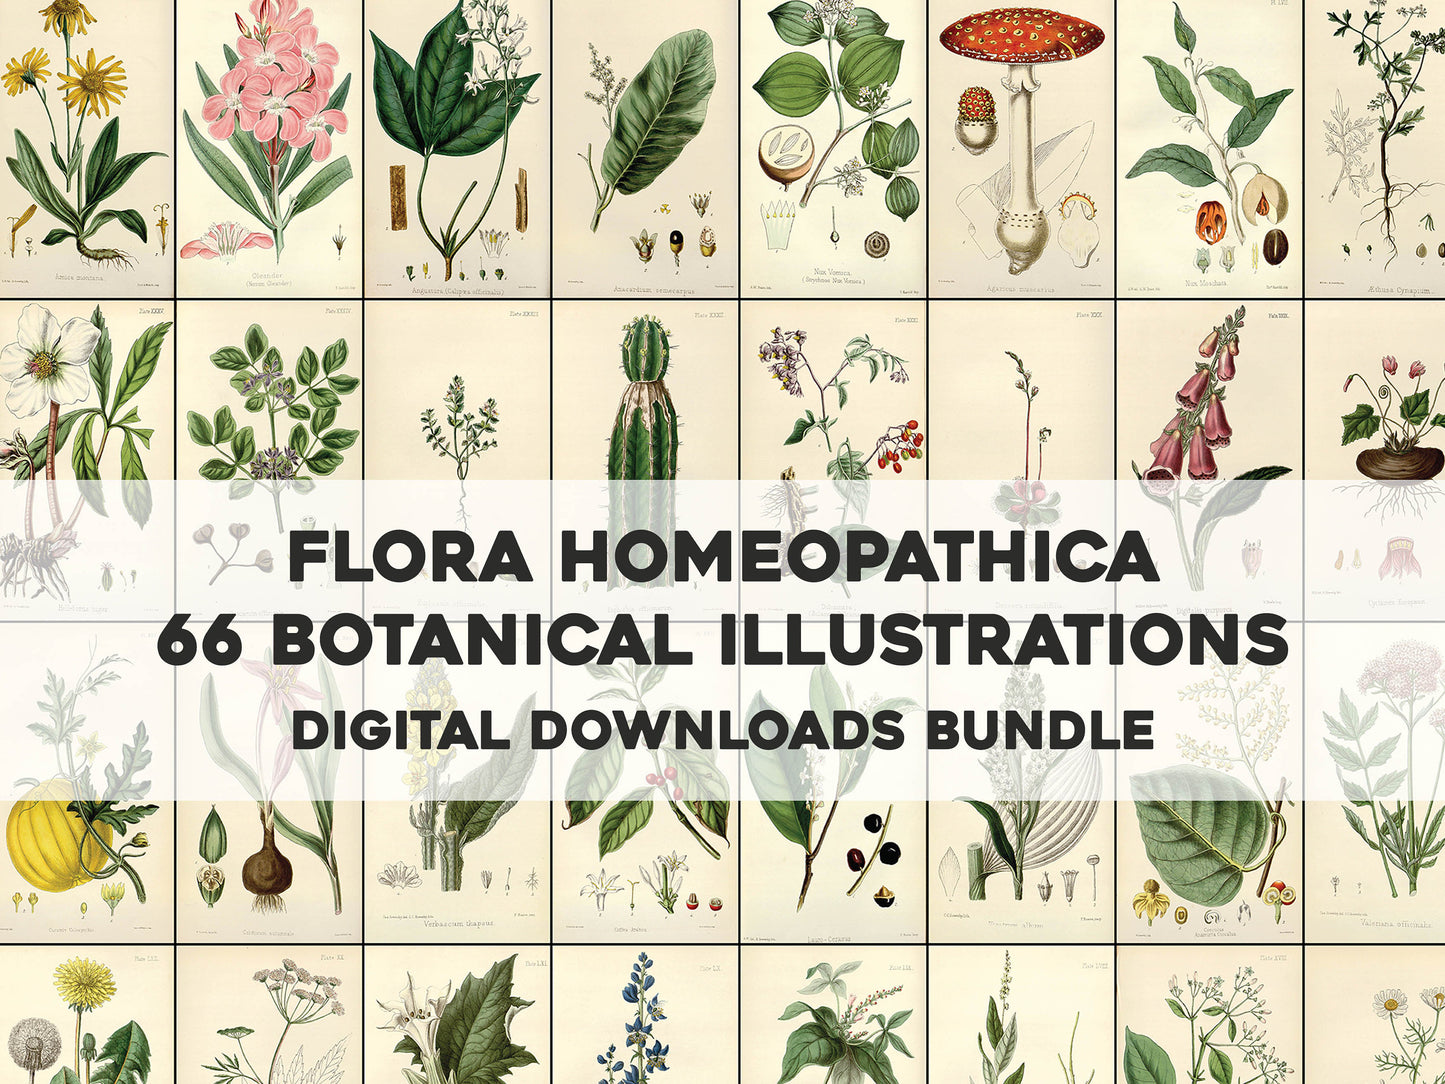 Flora Homeopathica [66 Images]